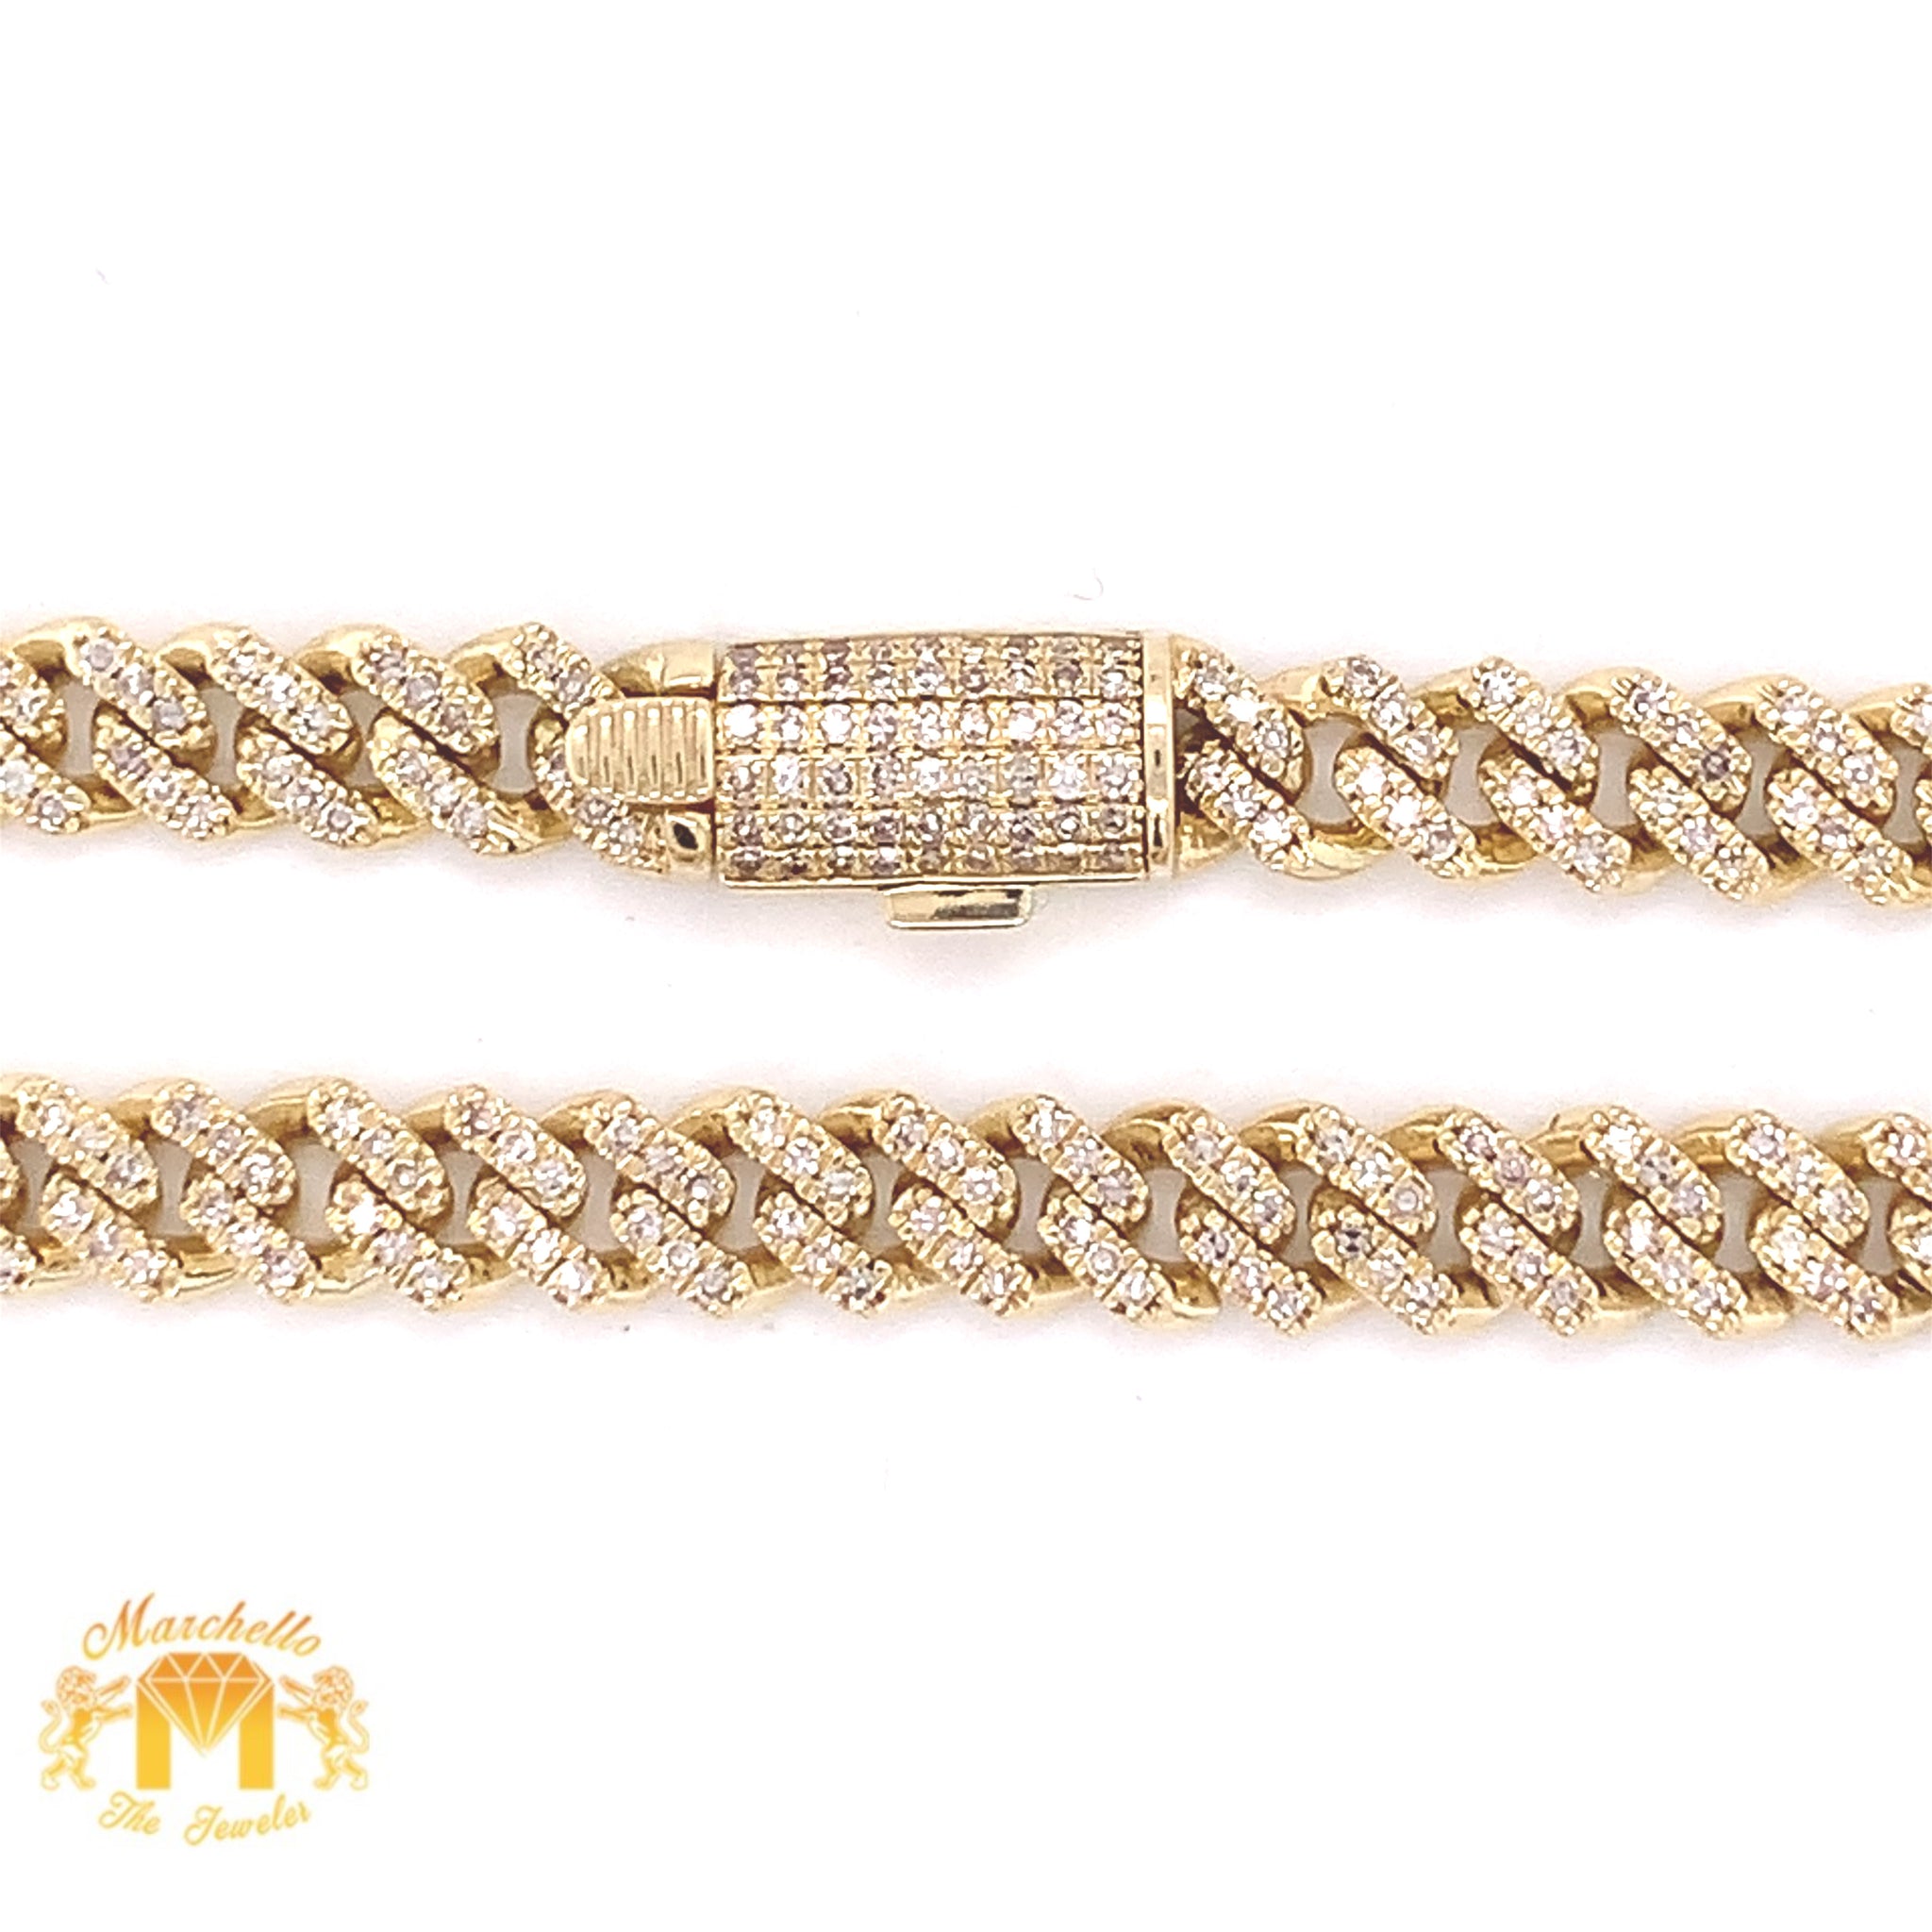 Cuban Link Necklace In Yellow Gold - 6mm